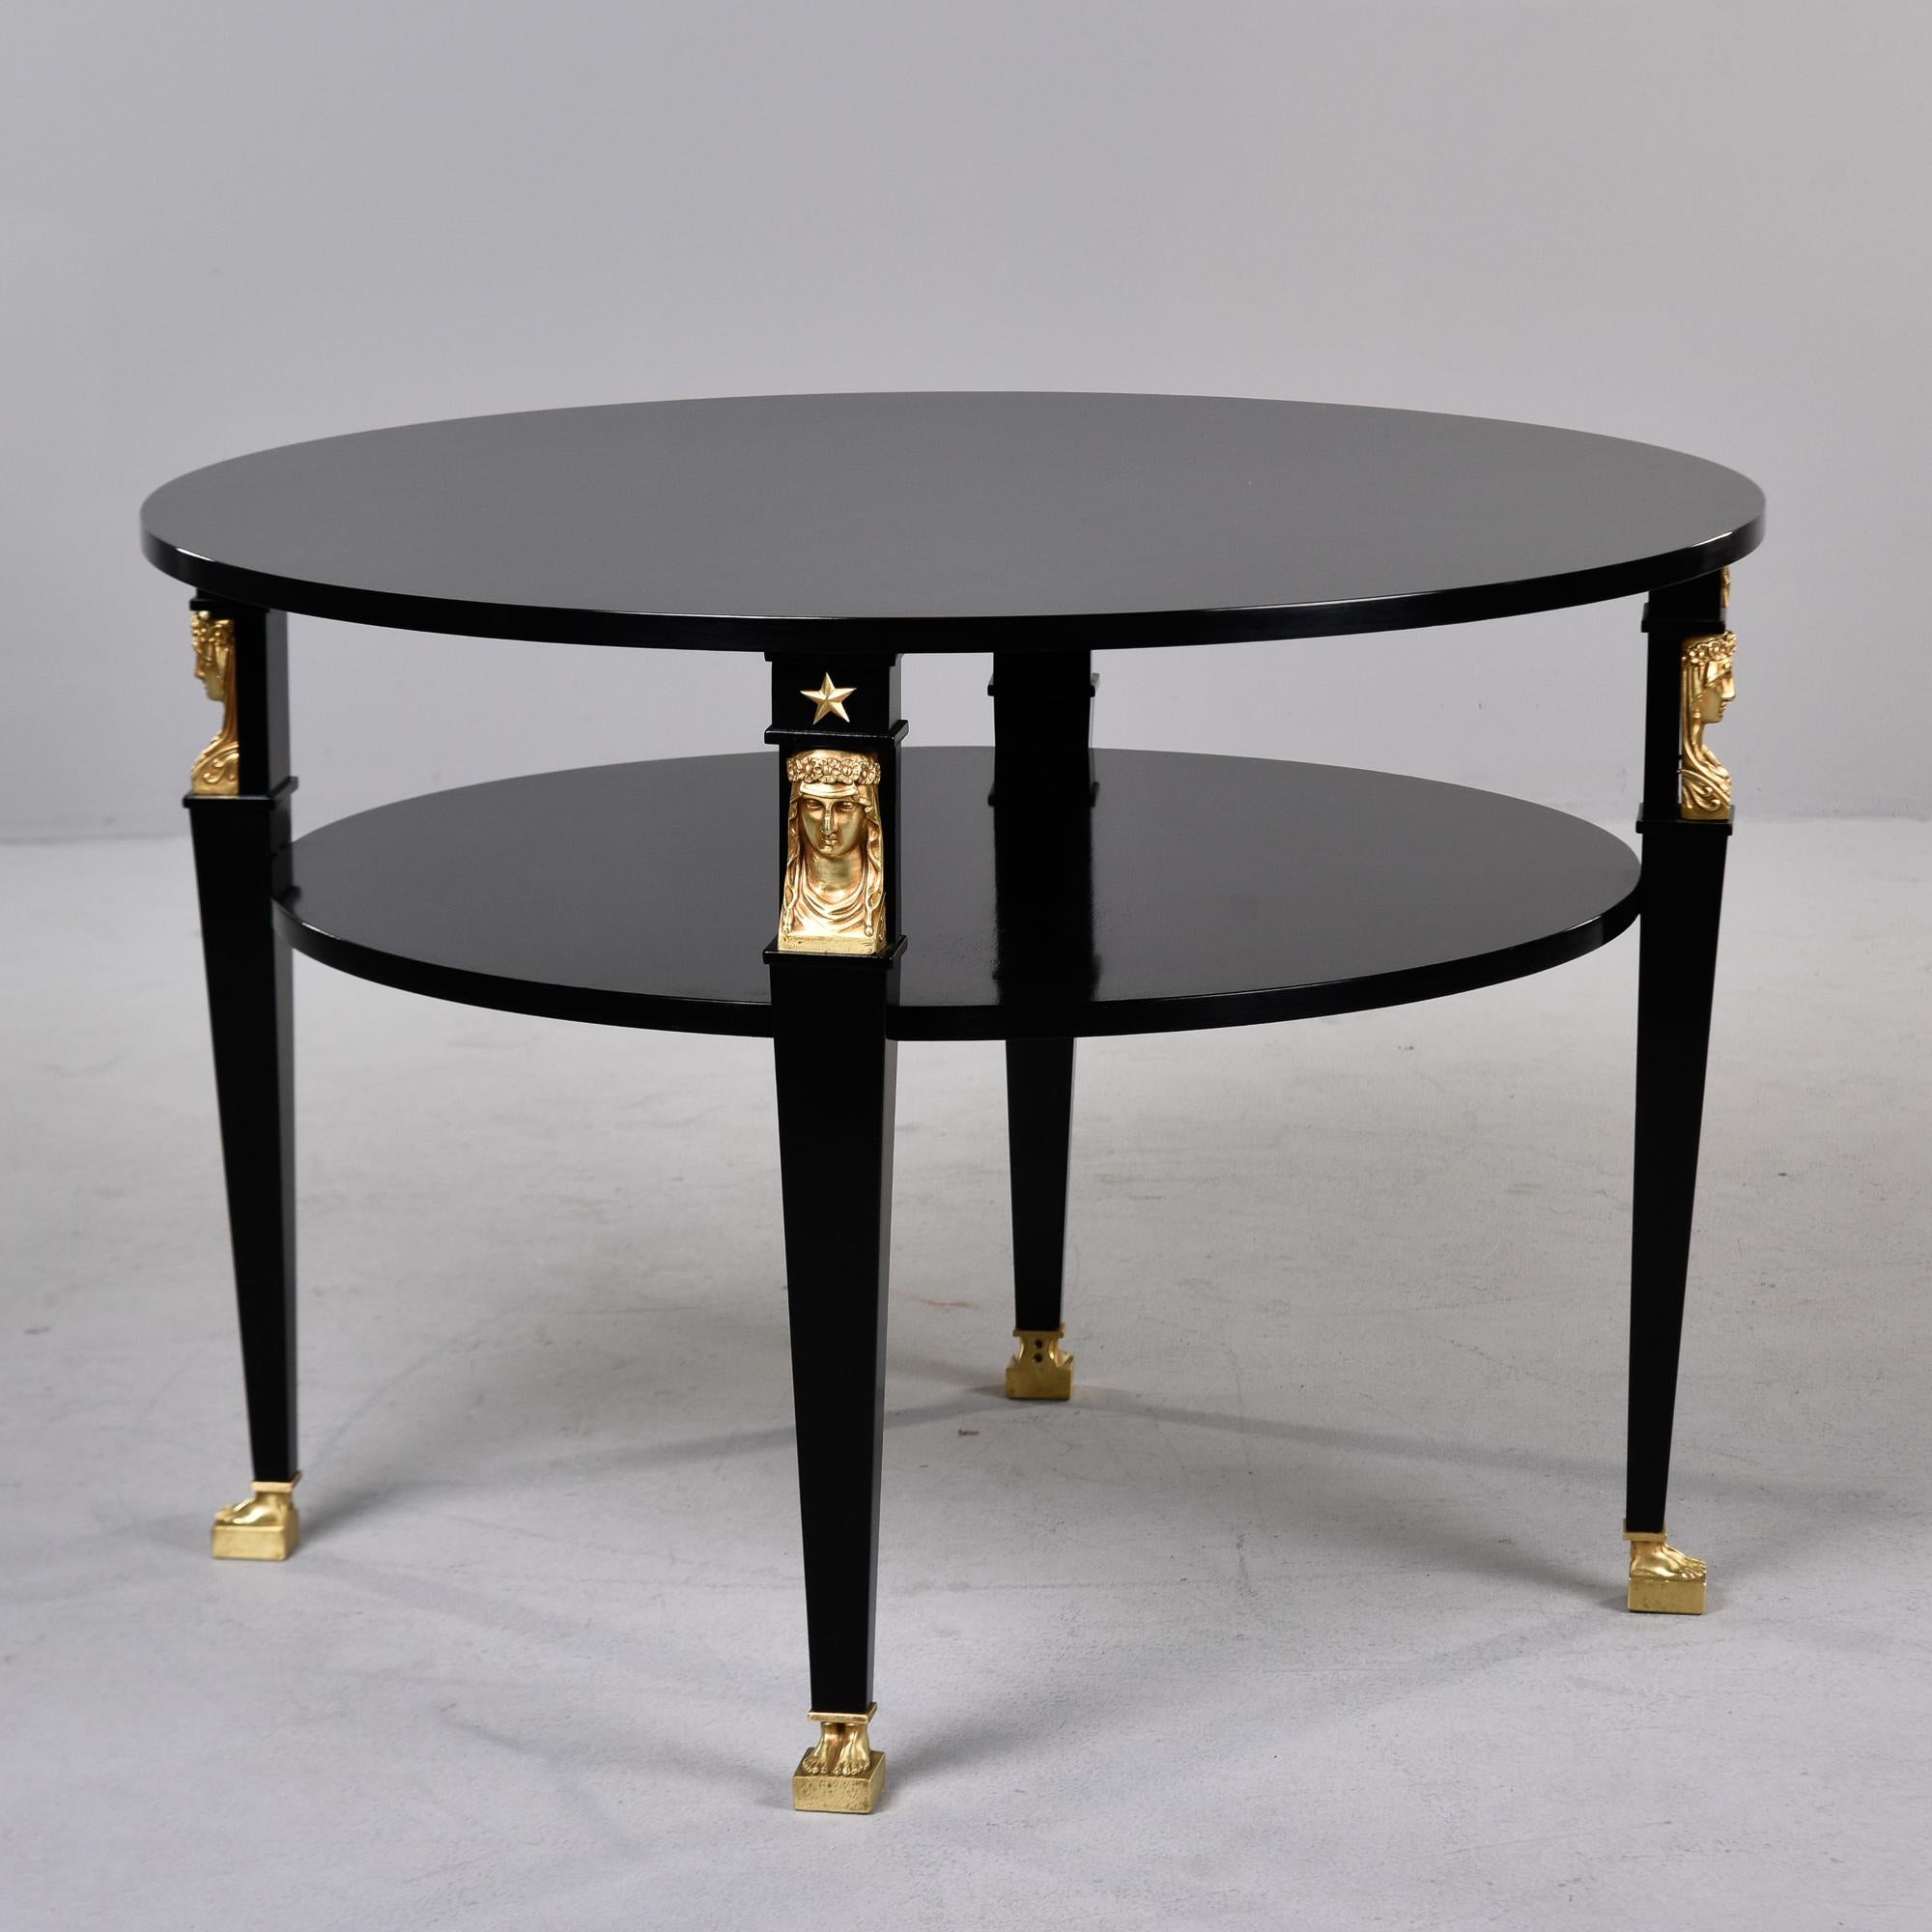 Found in France, this two tier round table has strong empire / neoclassic style elements. We had the table professionally ebonised in England and the gilt finish on the bronze figural mounts was restored as well. Each of the four legs is decorated